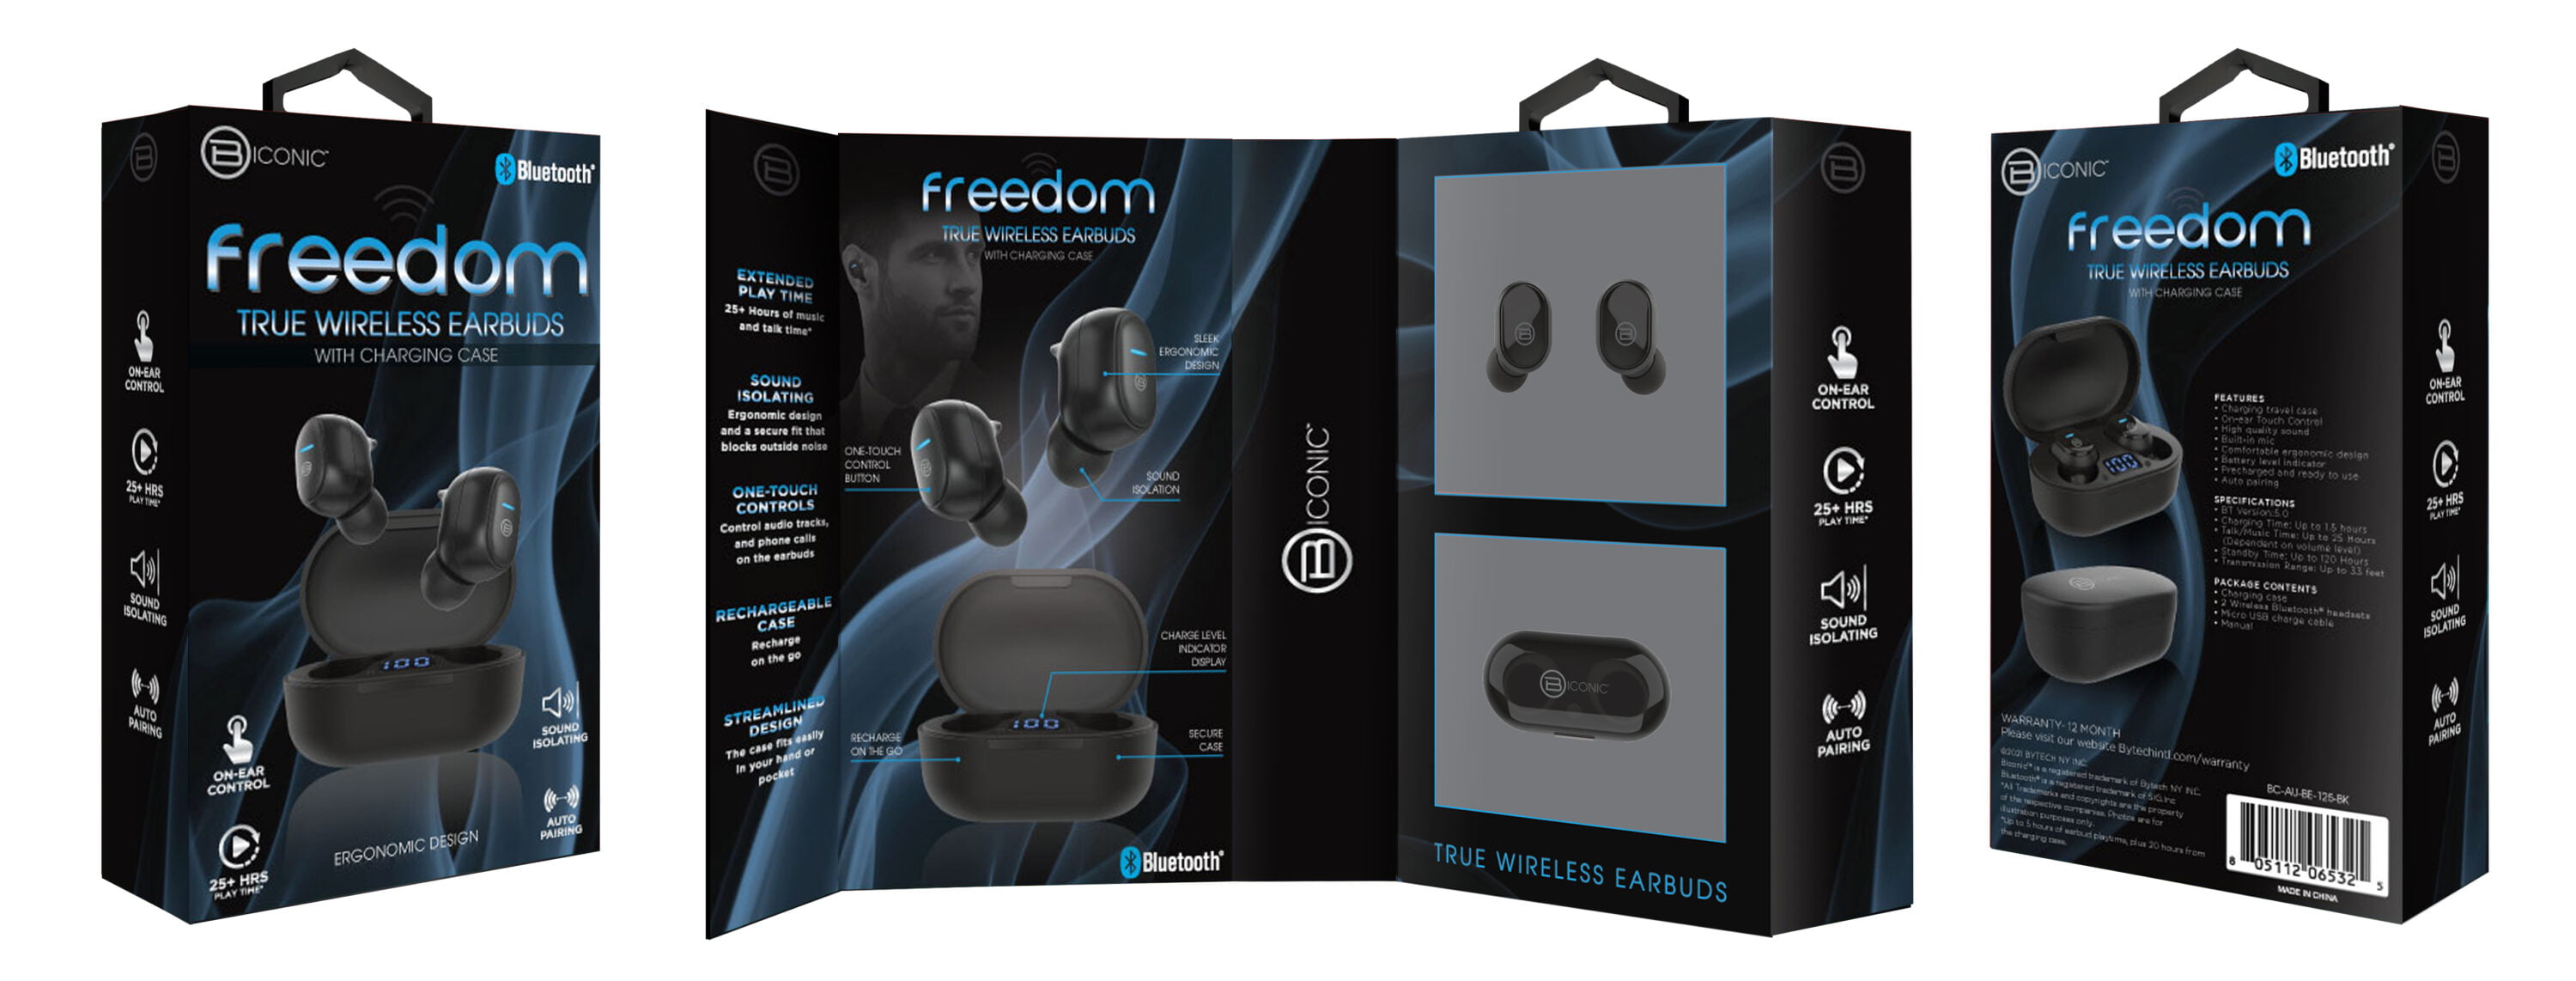 Affordable earbuds, Comfortable earbuds, Durable earbuds, Noise-canceling earbuds, In-ear earbuds, Tangle-free earbuds, Sweat-resistant earbuds